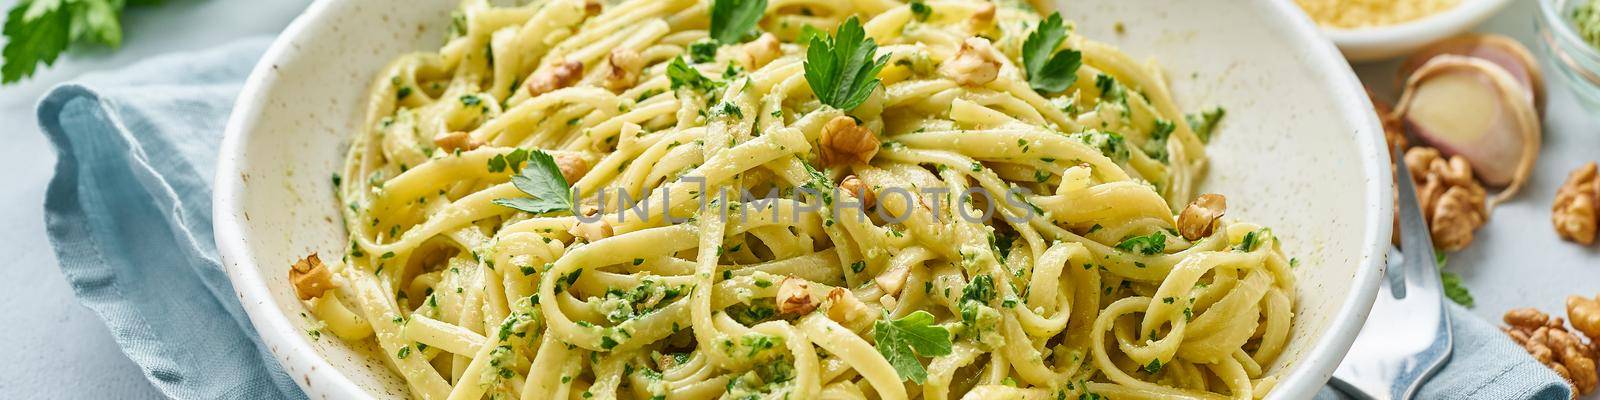 Banner with pesto pasta, bavette with walnuts, parsley, garlic, nuts, olive oil by NataBene